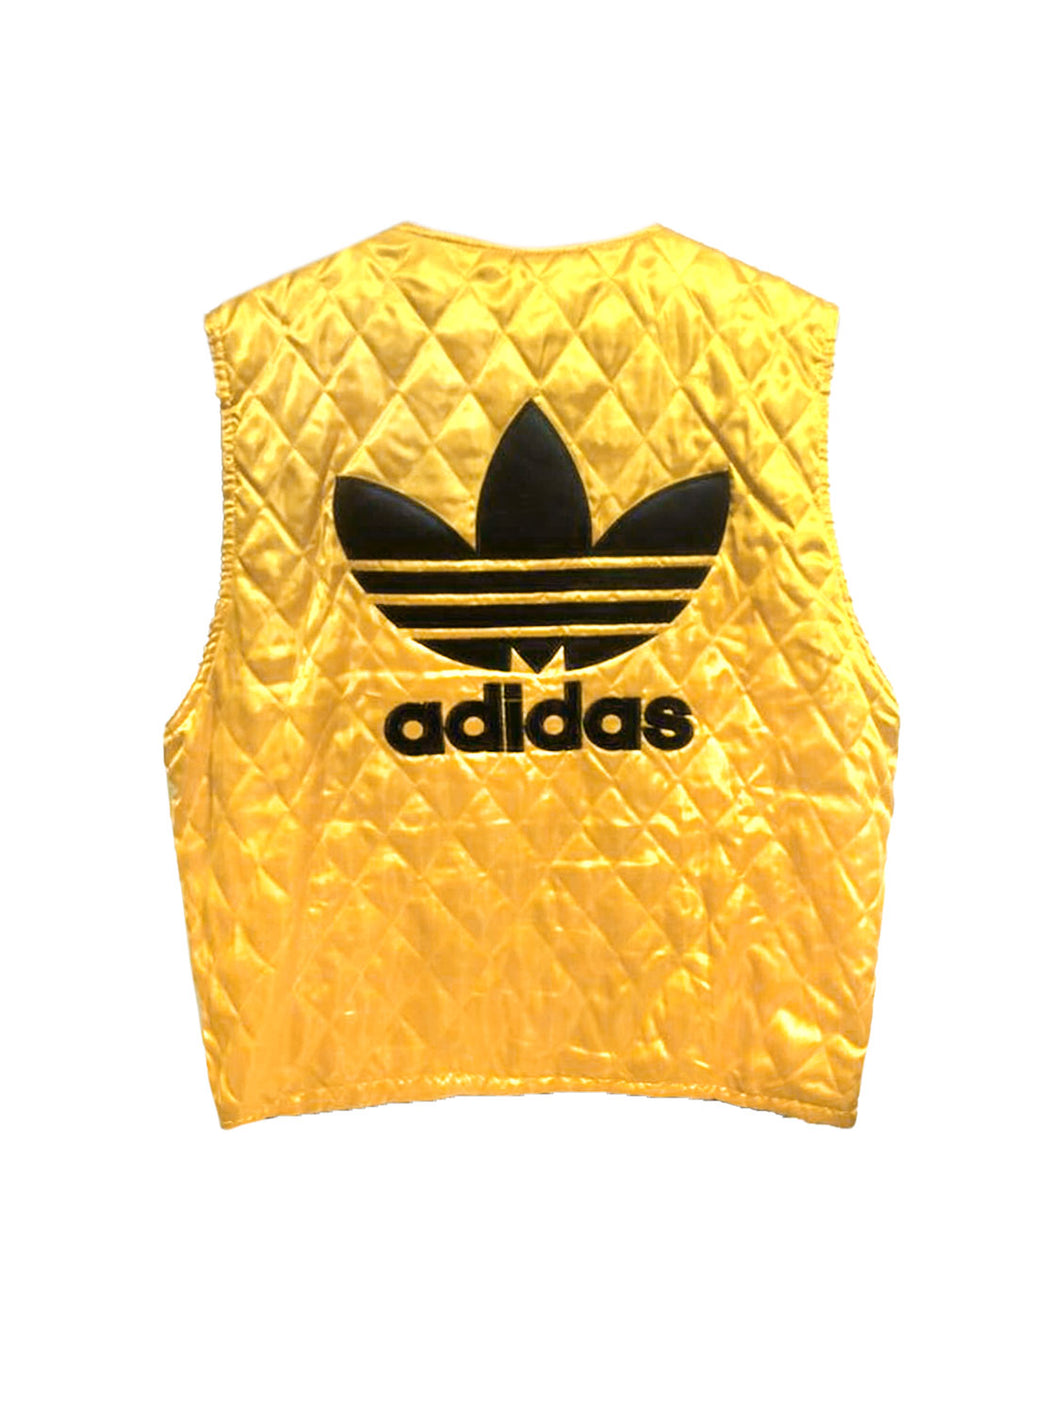 Adidas Golden Yellow Quilted Logo Vest